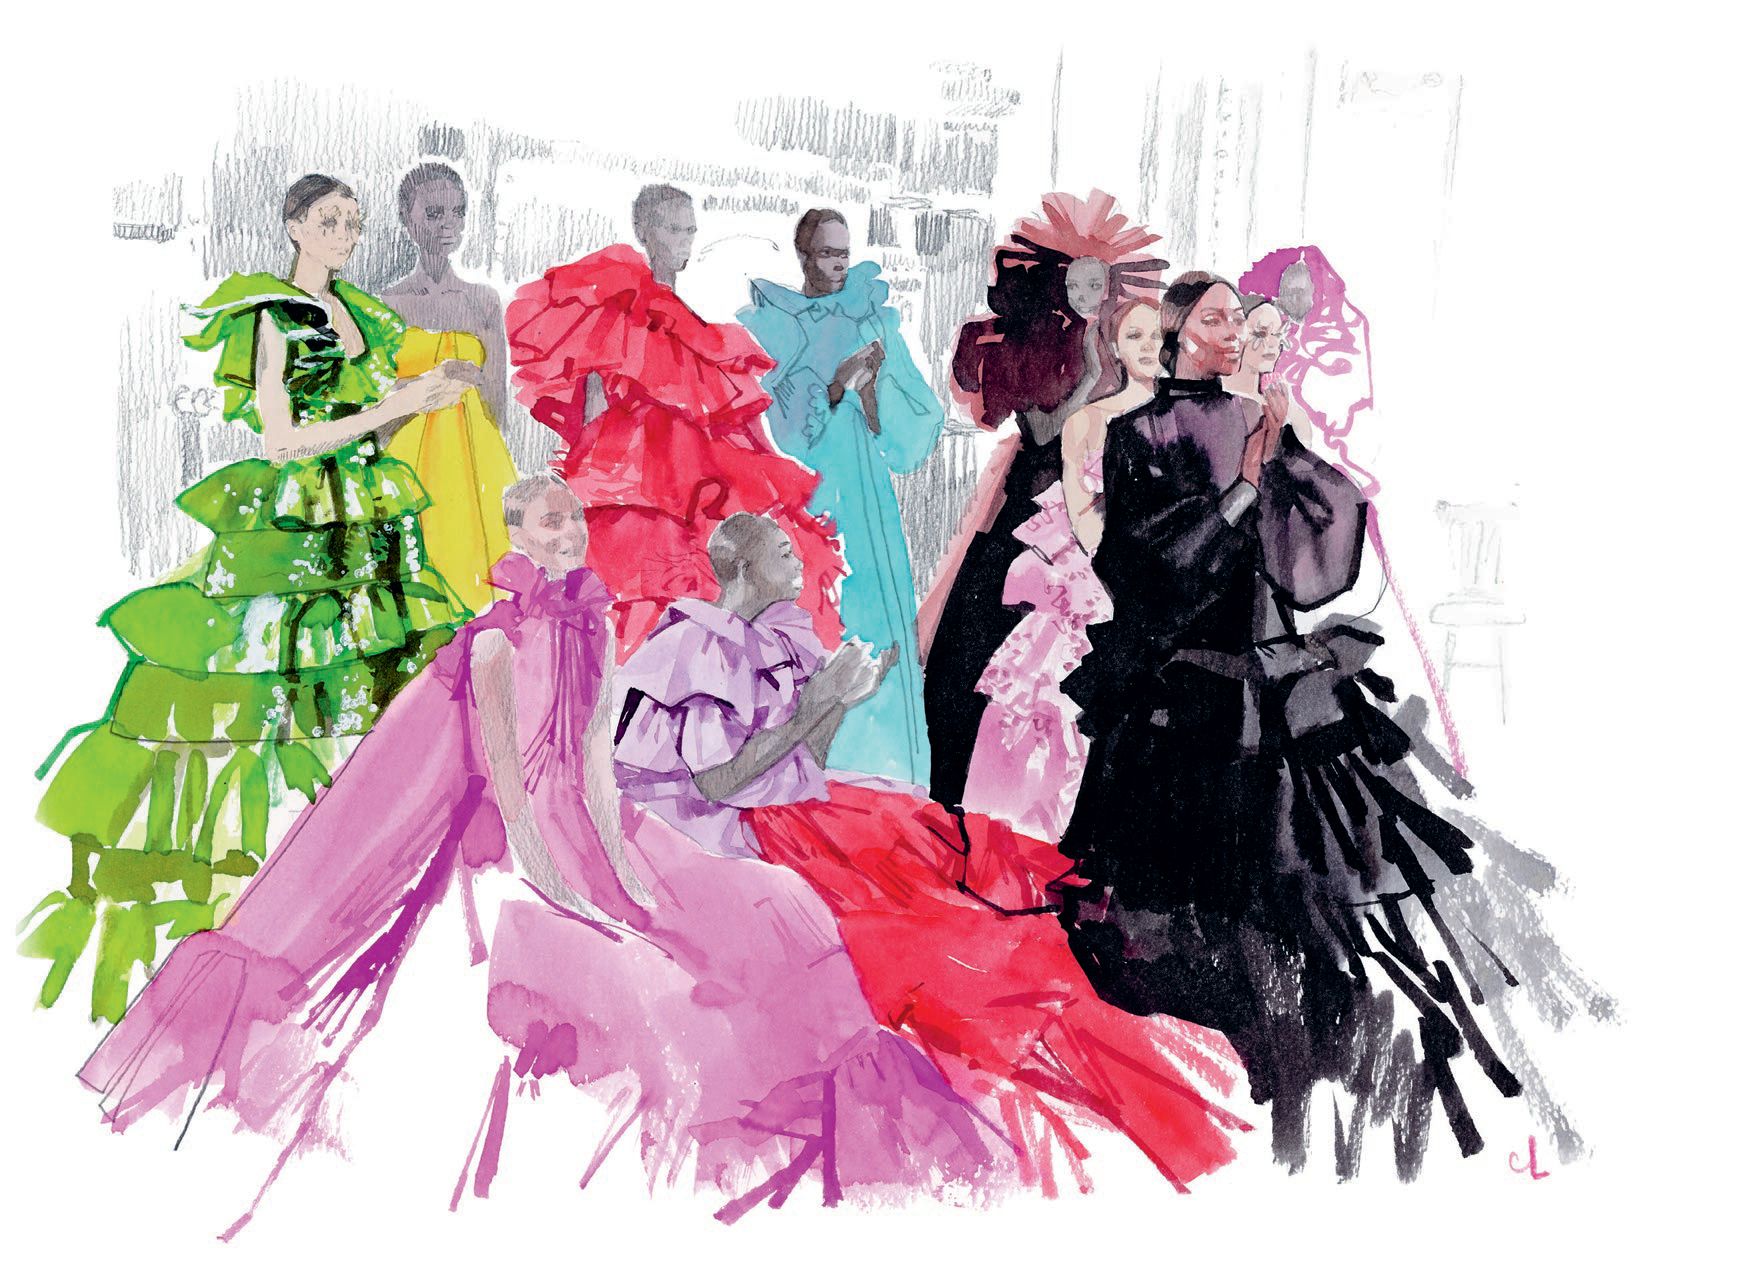 An illustration from the Valentino spring 2019 haute couture runway
show PHOTO COURTESY OF RIZZOLI AND FLAMMARION